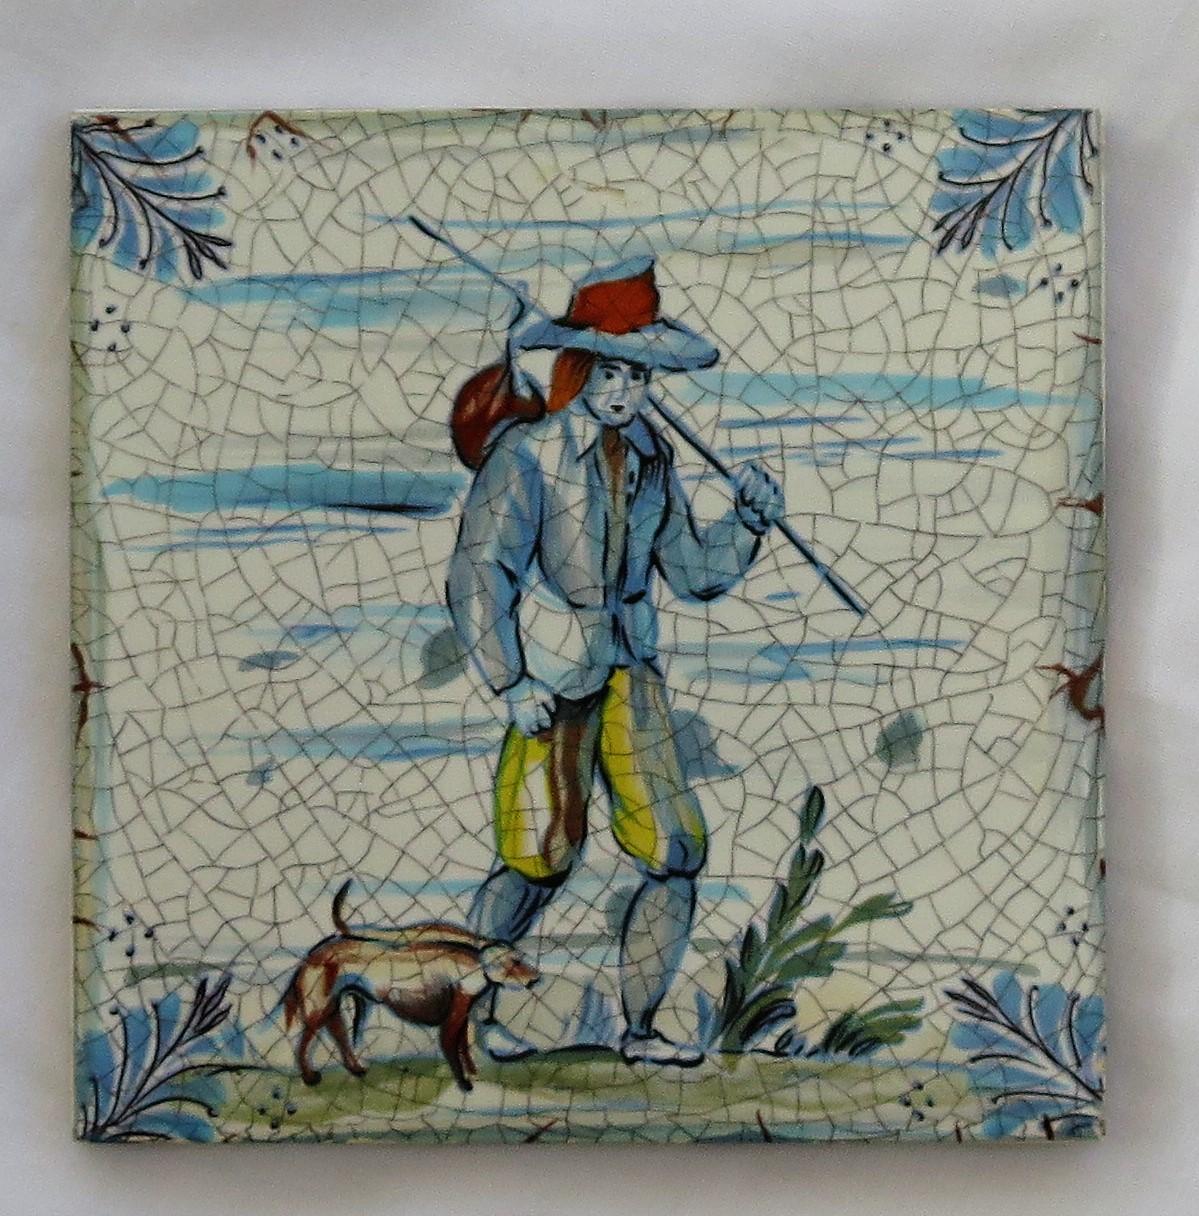 20th Century Set of Eleven Ceramic Wall Tiles Square by Servais of Germany Set 4, circa 1950